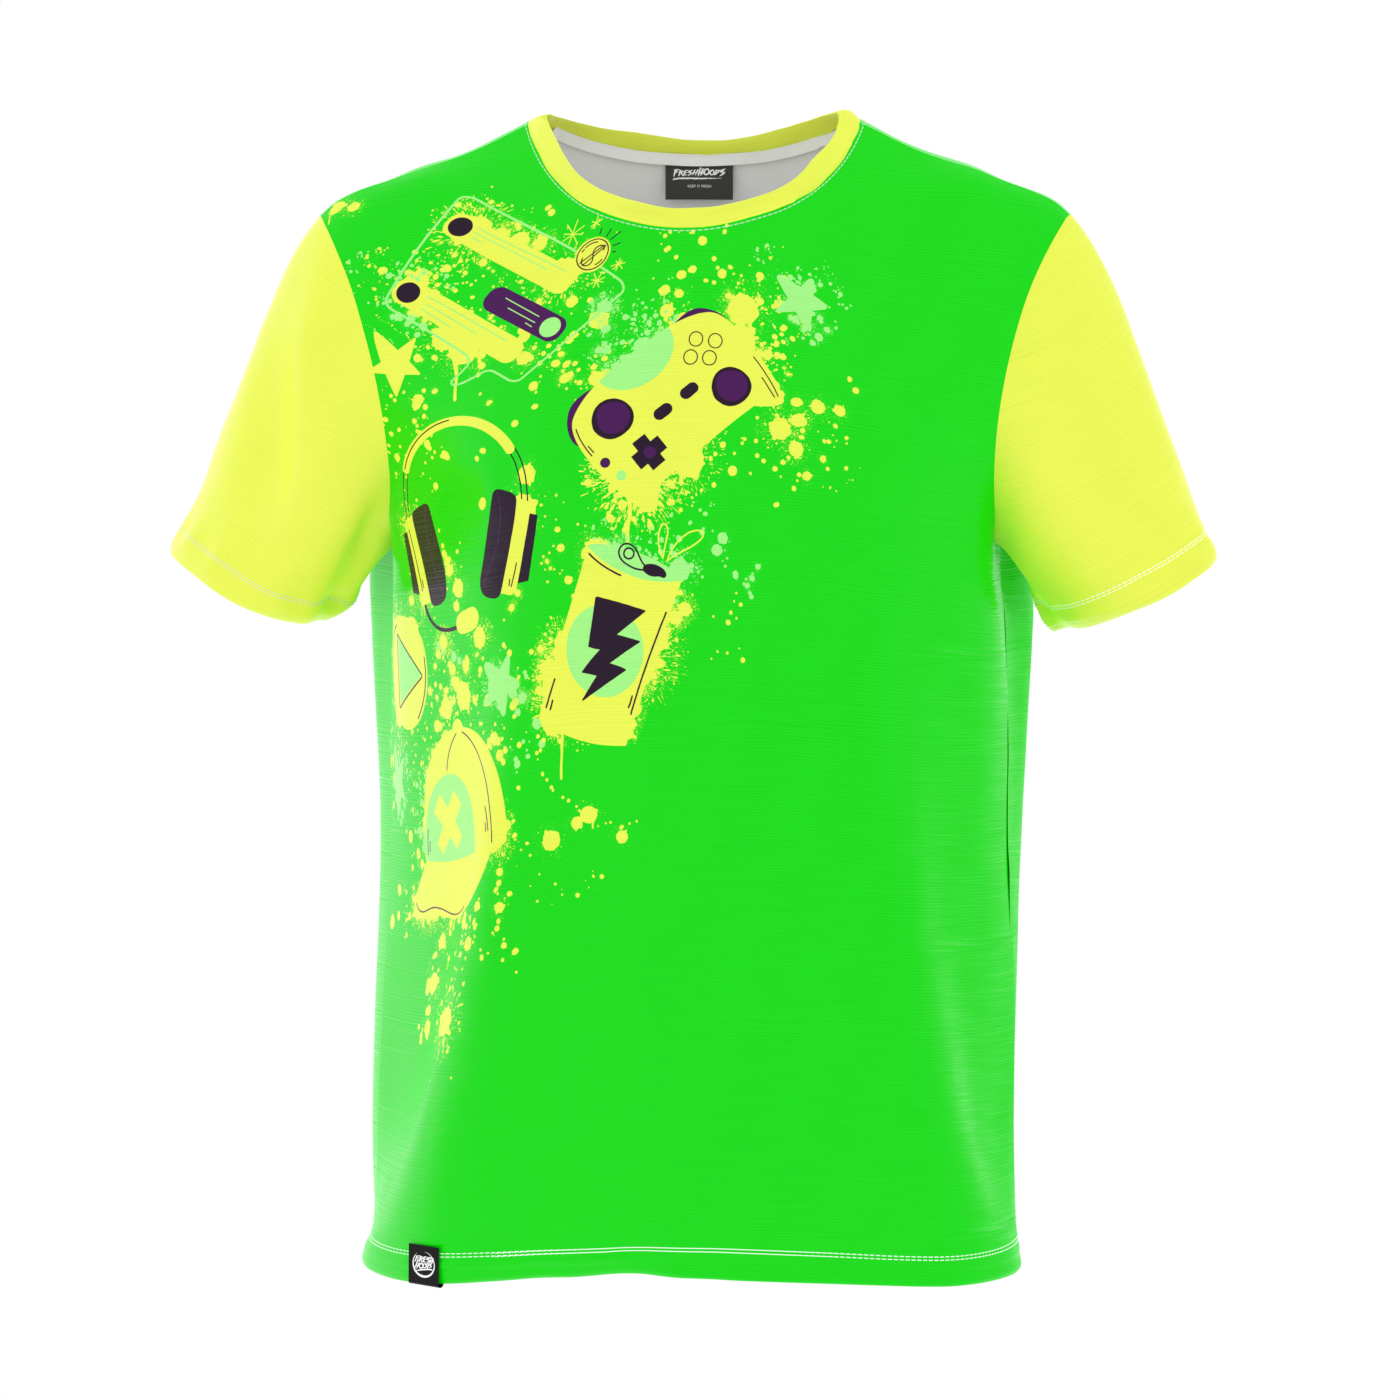 Level Up Your Style with GAME-Continue T-Shirt